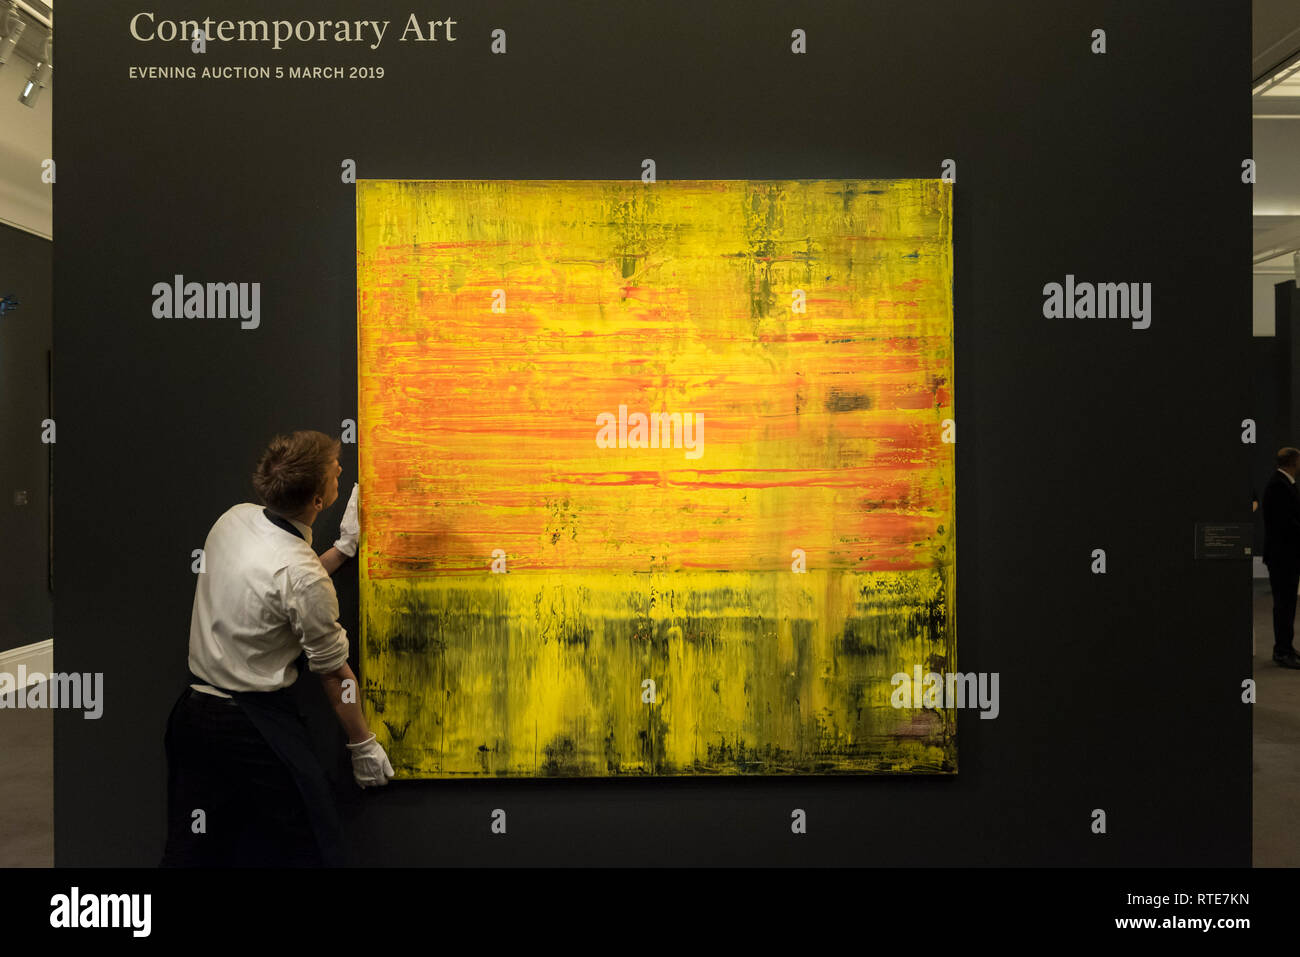 London, UK.  1 March 2019. A technician examines ''Abstraktes Bild'', 2009, by Gerhard Richter, (Est. £6,000,000 - 8,000,000).  Preview of Sotheby's Contemporary Art Sale in their New Bond Street galleries.  Works by artists including Tracey Emin, Jenny Saville, Jean-Michel Basquiat and Andy Warhol will be offered for auction on 5 March 2019.   Credit: Stephen Chung / Alamy Live News Stock Photo